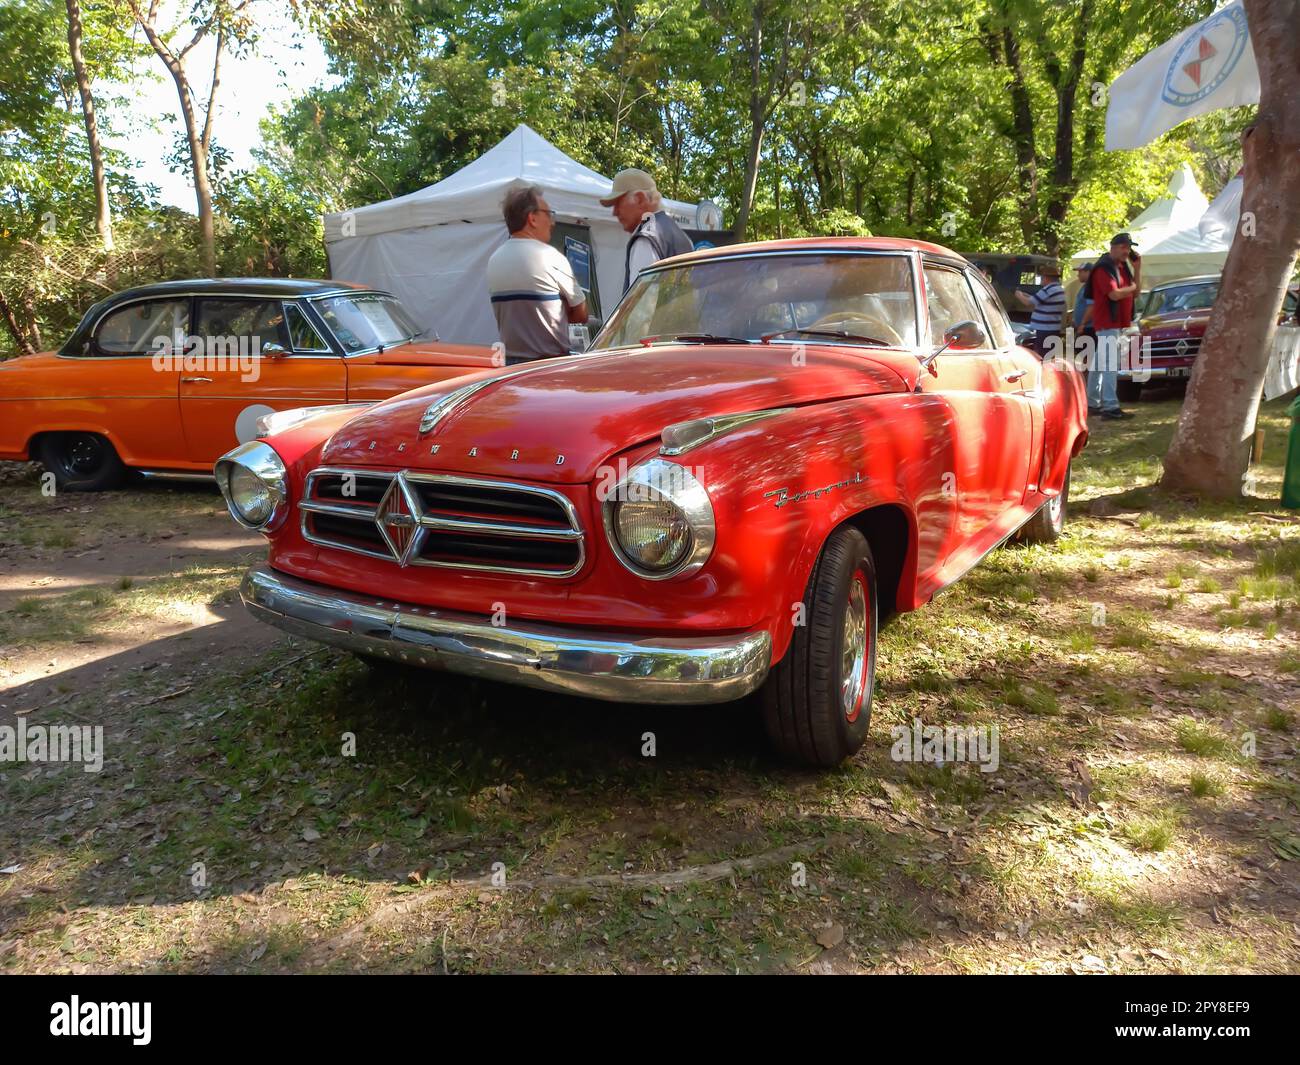 San Isidro, Argentina - Oct 7, 2022: Old red 1960s Borgward Hansa Isabella coupe in a park. Nature, grass, trees. Autoclasica 2022 classic car show. Stock Photo